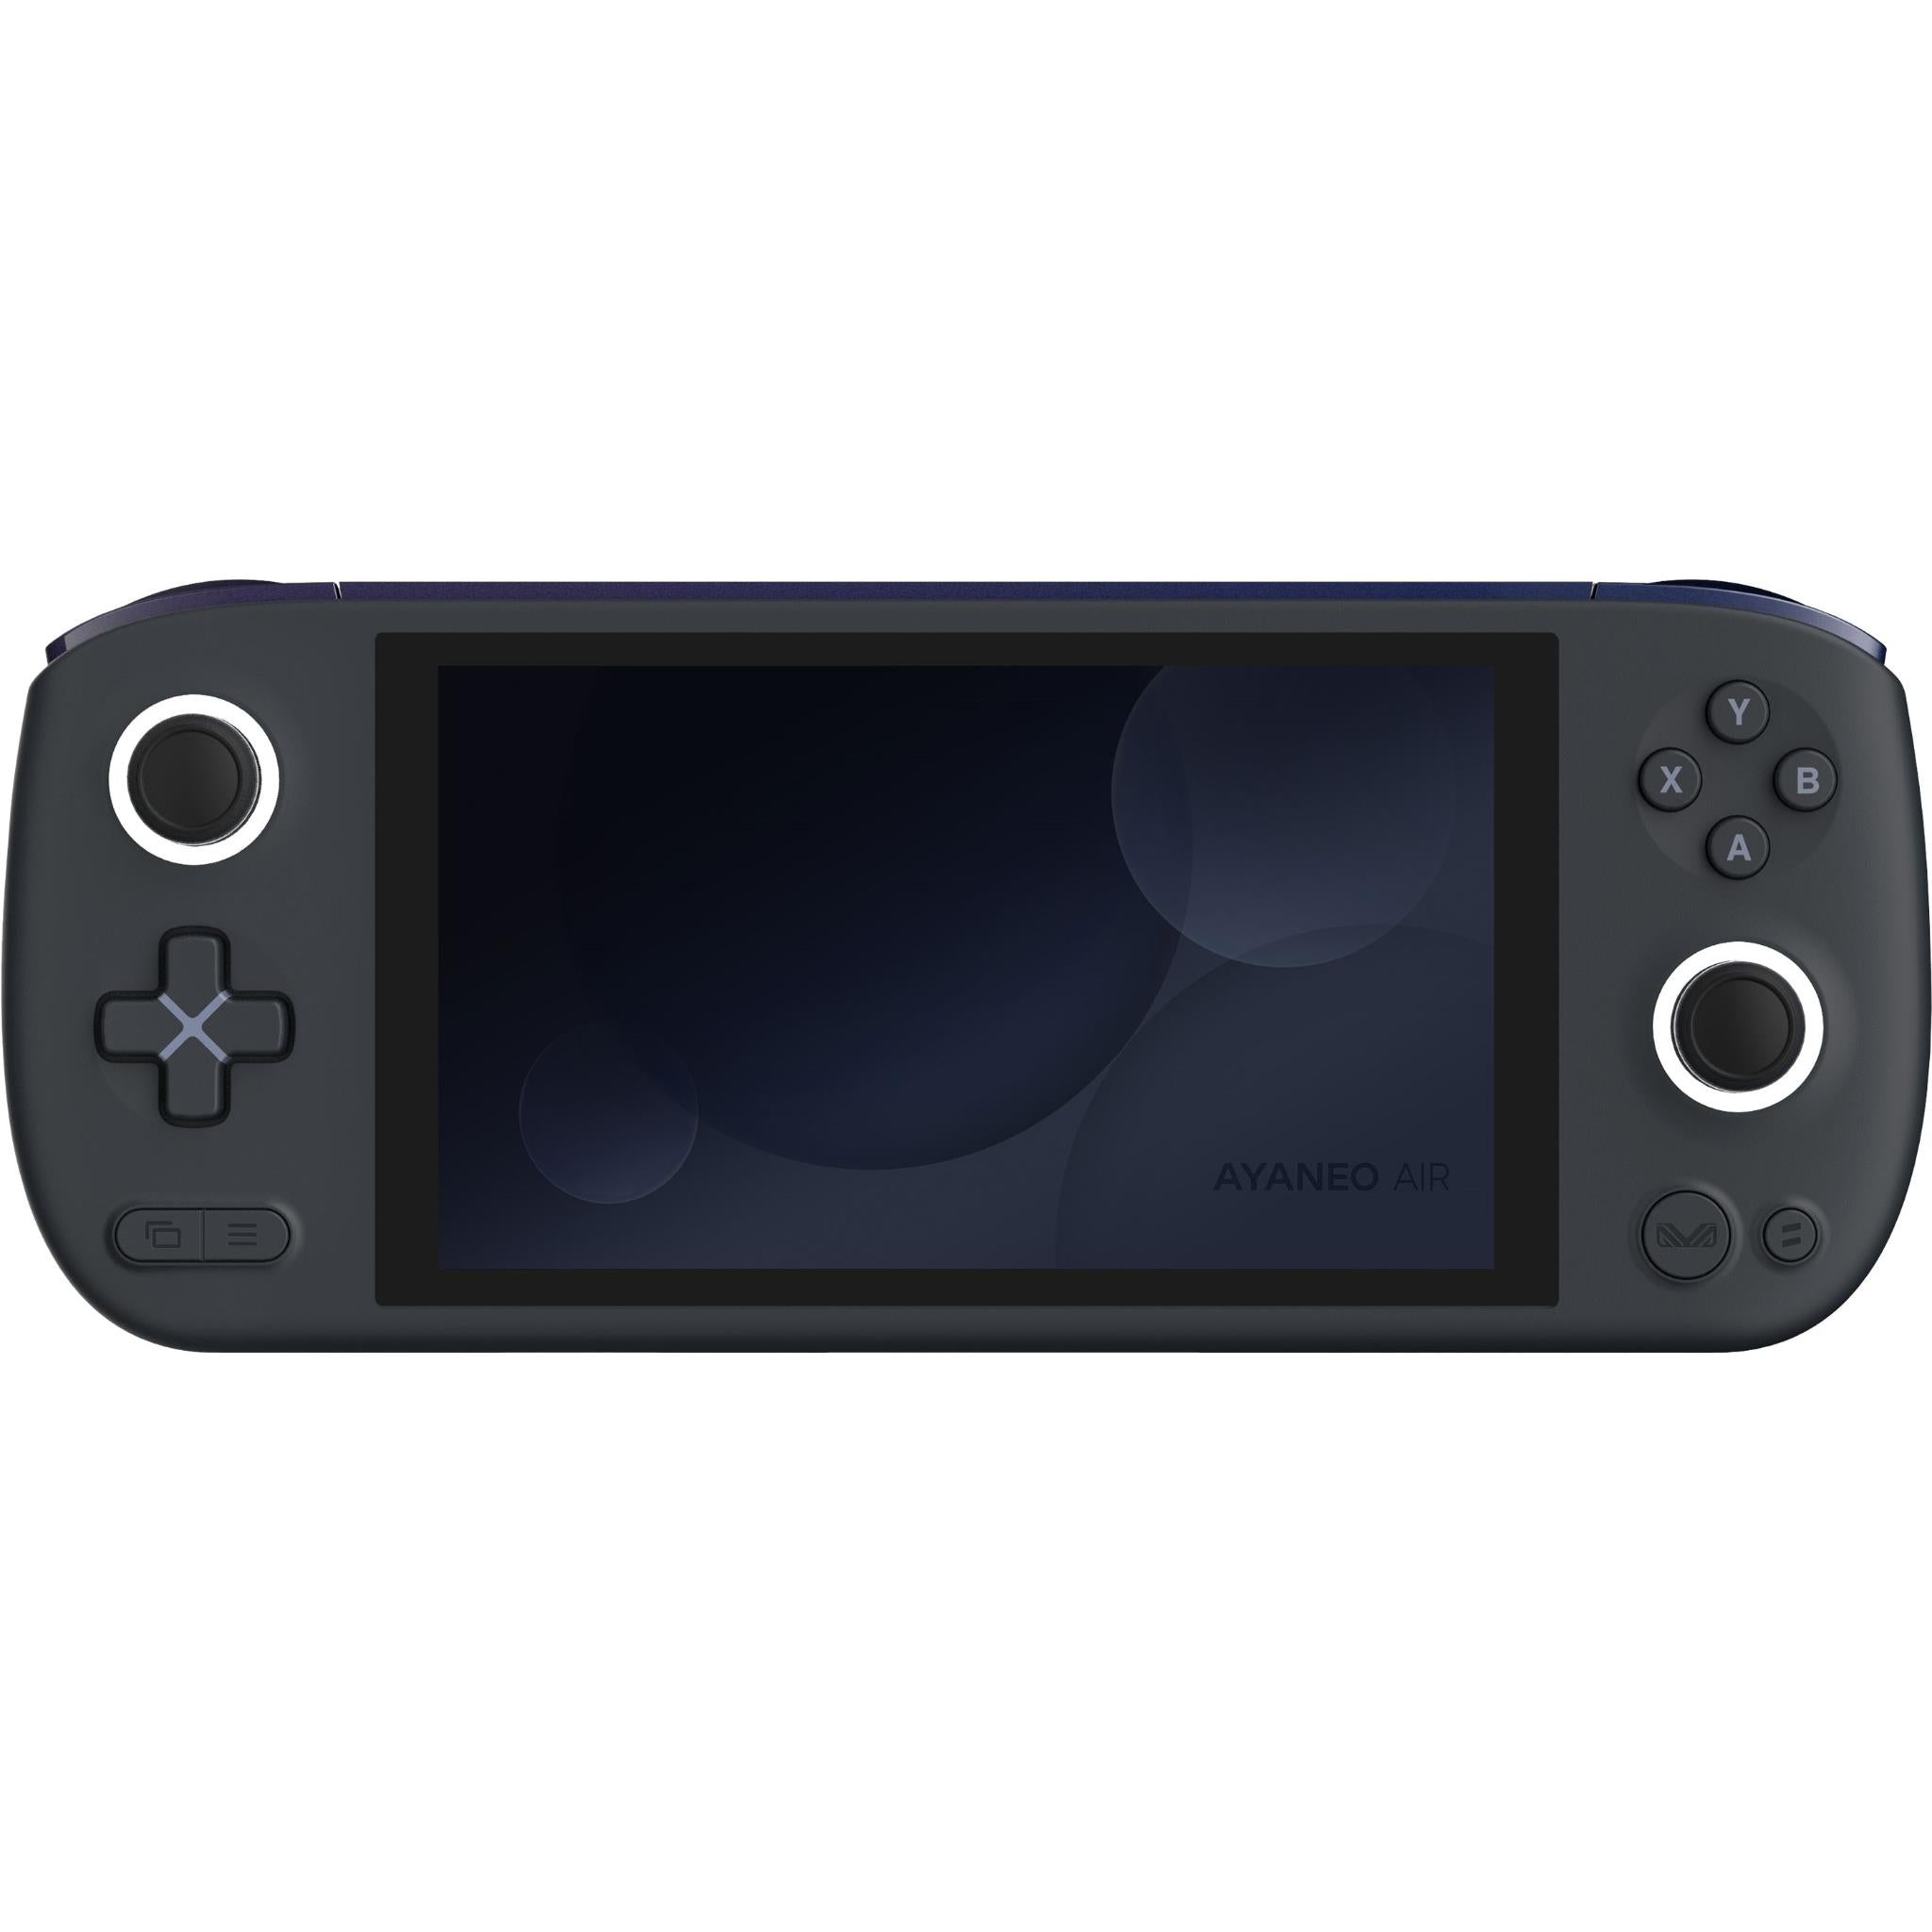 ayaneo air pro handheld gaming console